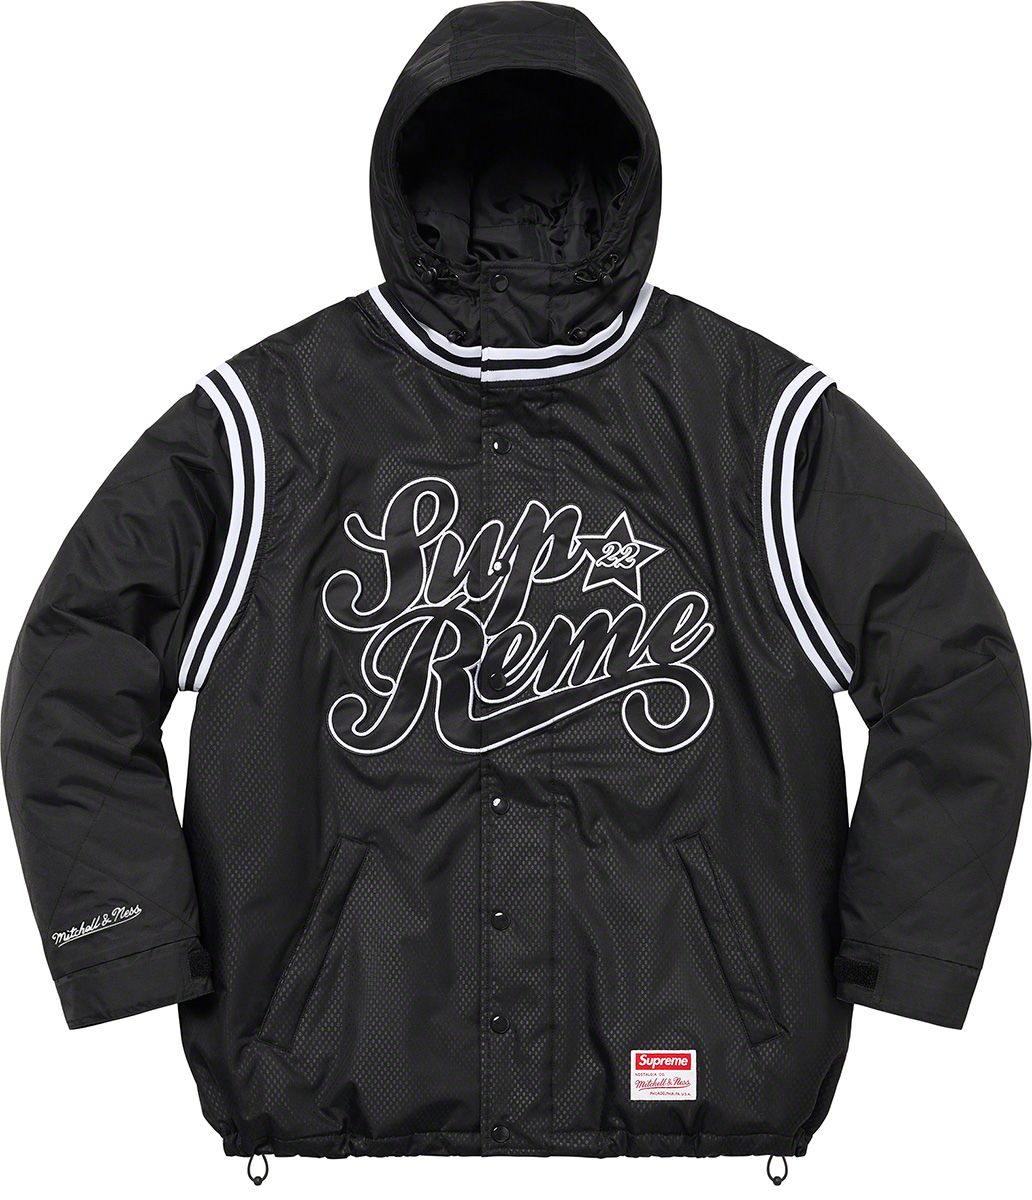 Supreme®/Mitchell & Ness® Quilted Sports Jacket - Spring/Summer 